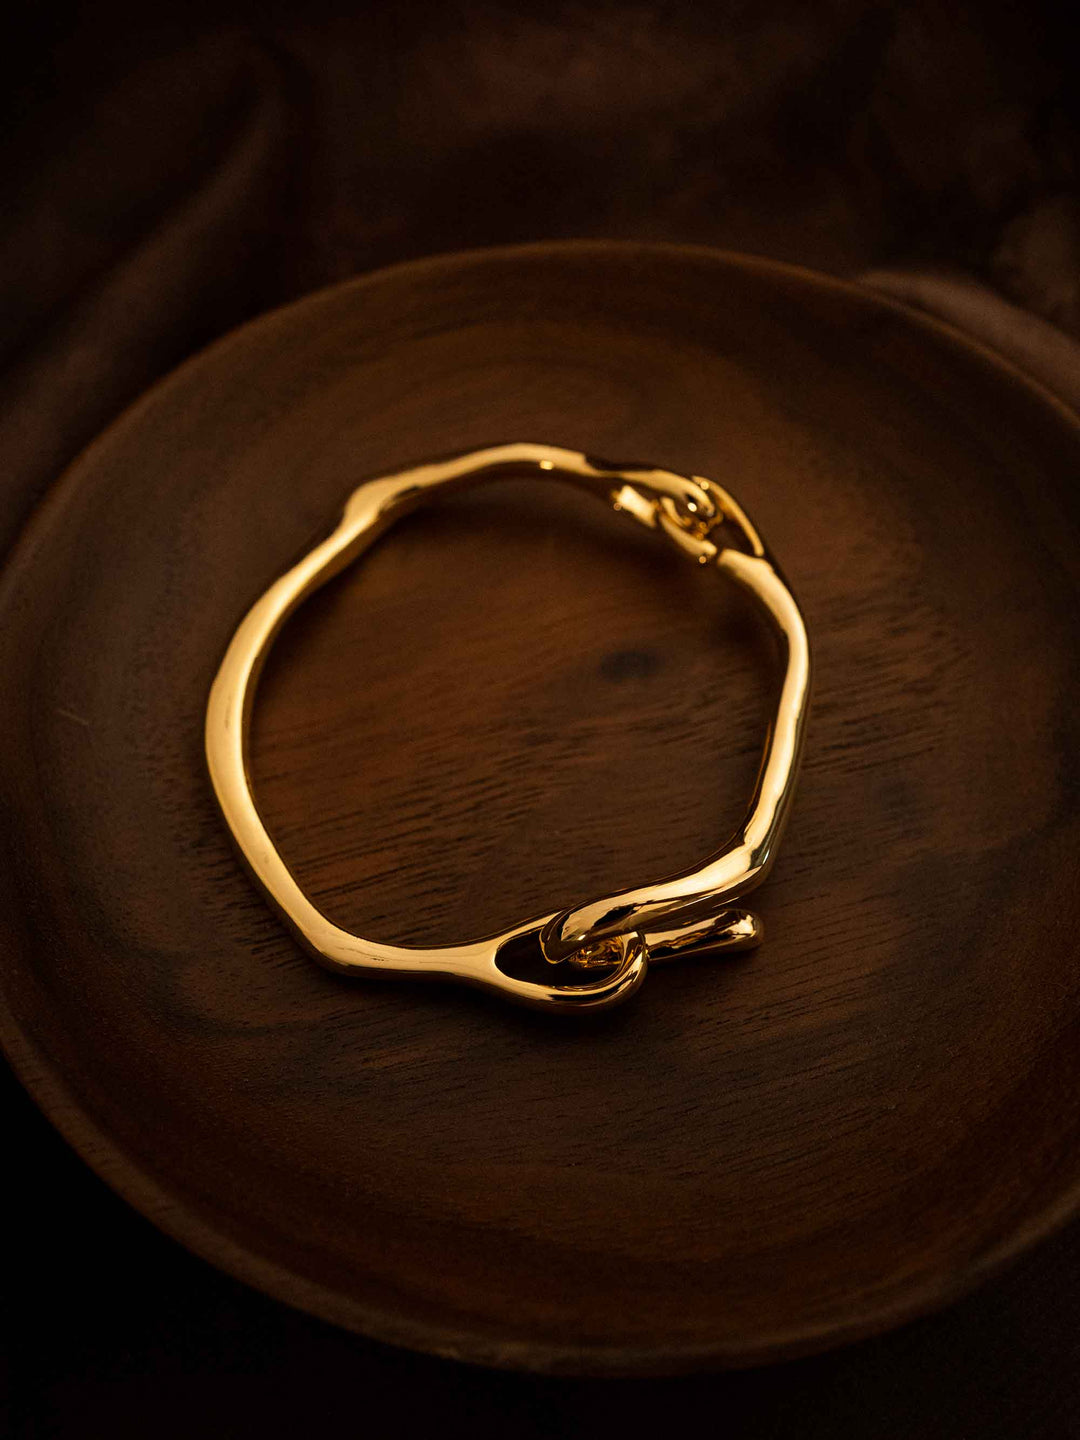 A gold bracelet with a gold hook closure